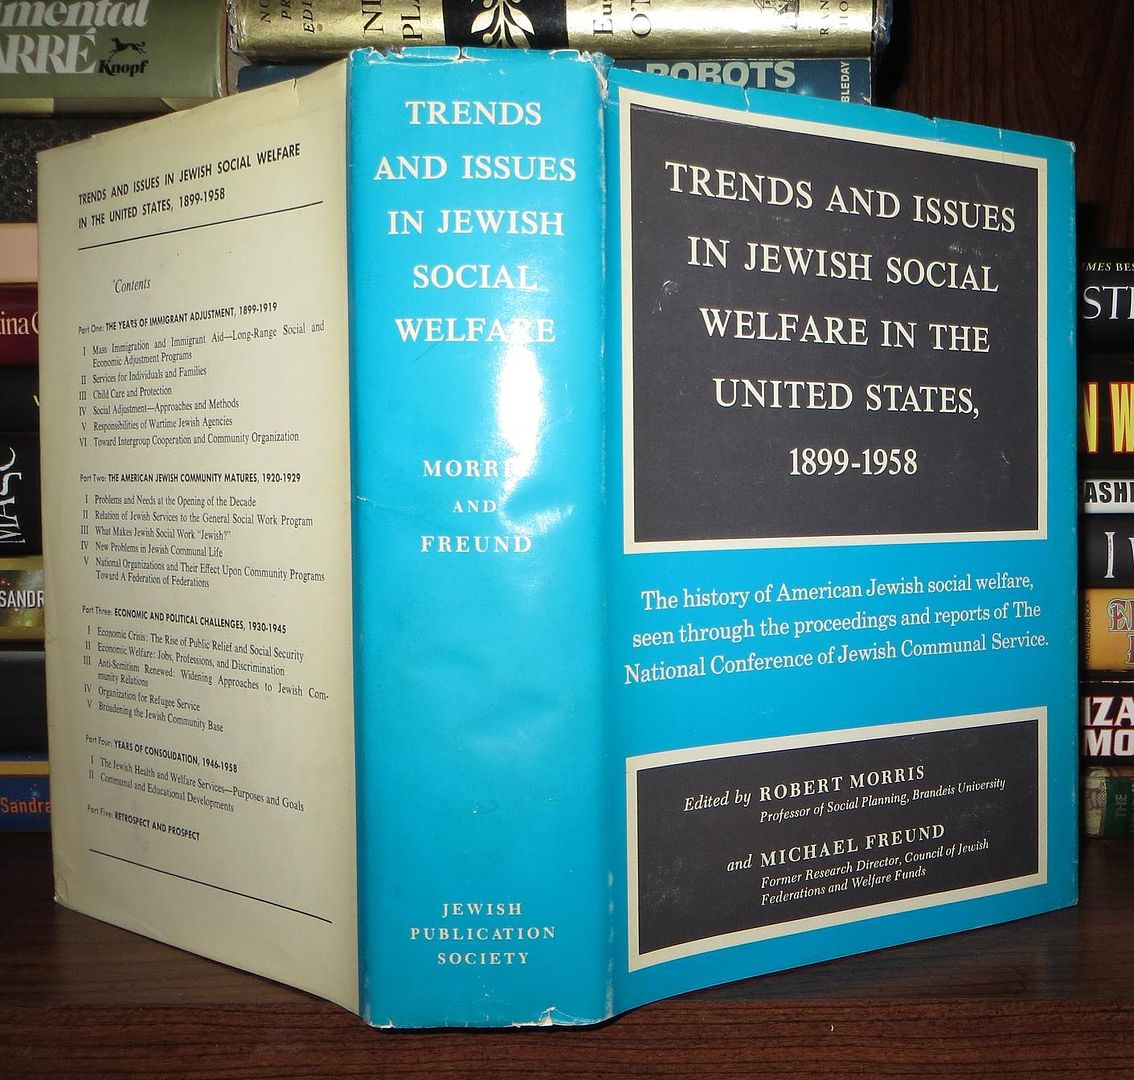 MORRIS, ROBERT AND FREUND, MICHAEL - Trends and Issues in Jewish Social Welfare in the United States, 1899-1952